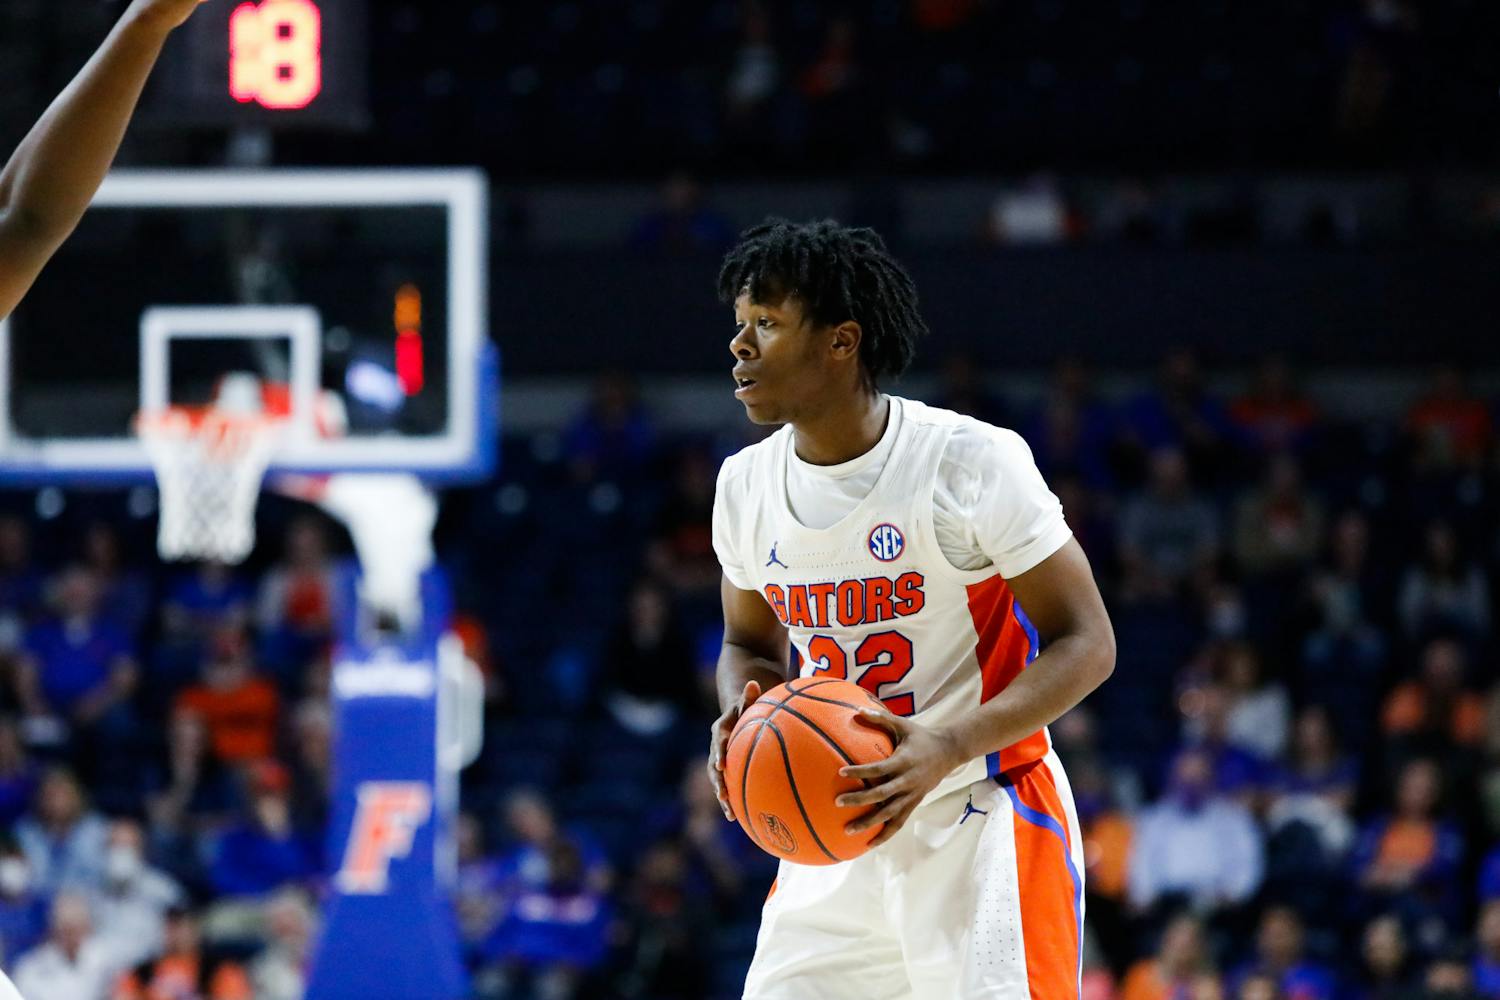 Florida&#x27;s Tyree Appleby holds the ball during a Dec. 6 game against Texas Southern. The point guard scored 16 points and dished out seven assists in a losing effort Wednesday.